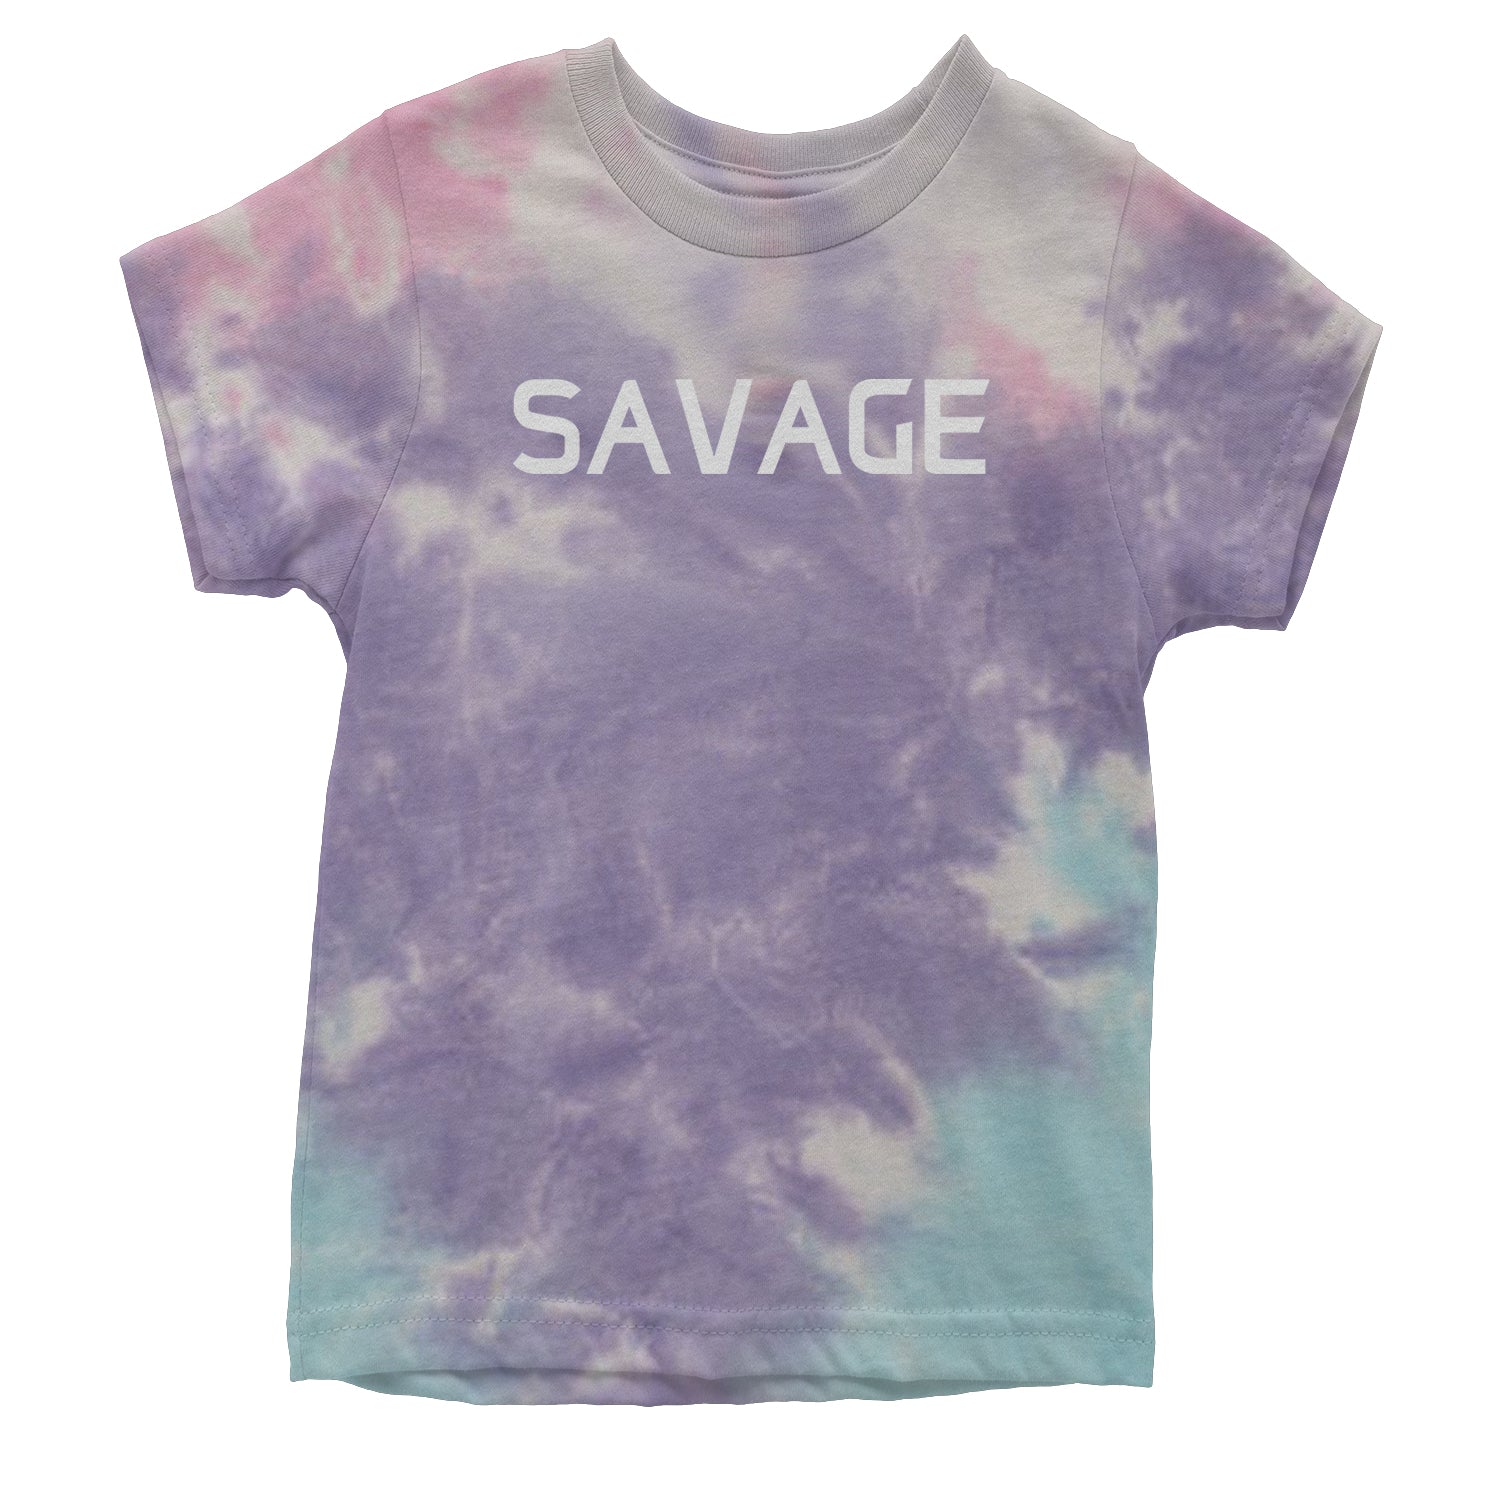 Savage Youth T-shirt #expressiontees by Expression Tees